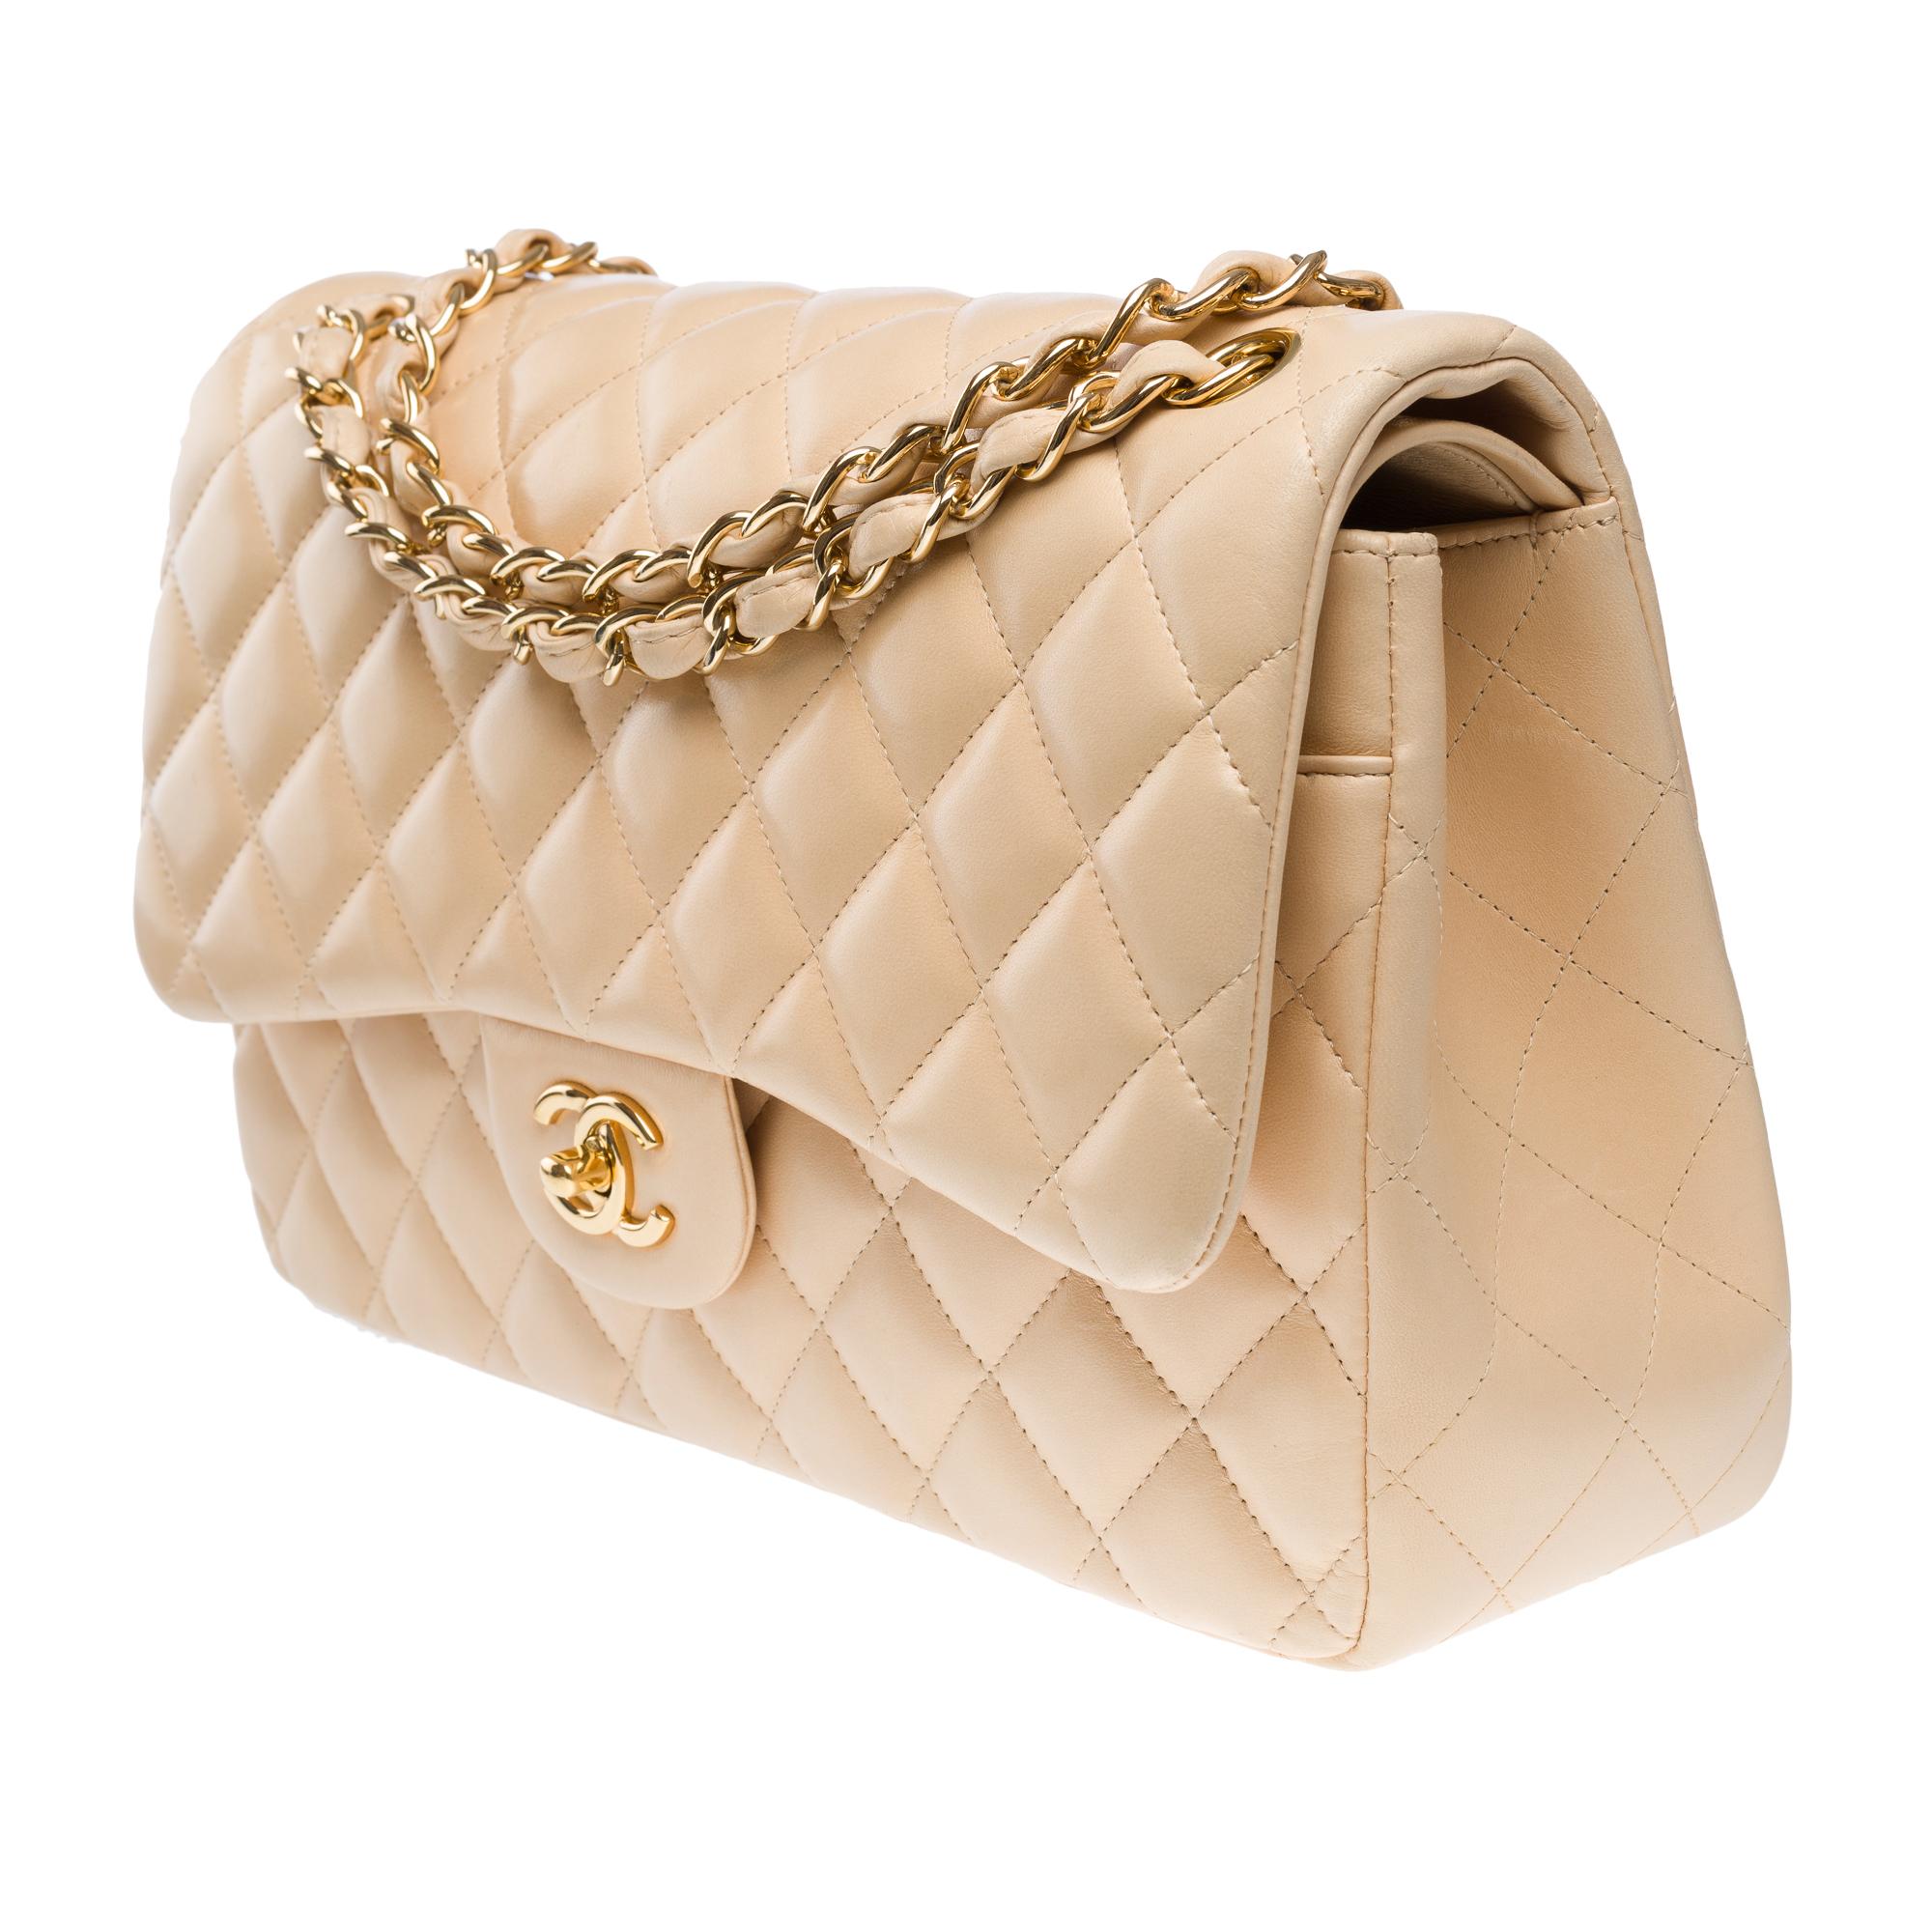 Chanel Timeless Jumbo double flap shoulder bag in beige quilted lambskin, GHW 1